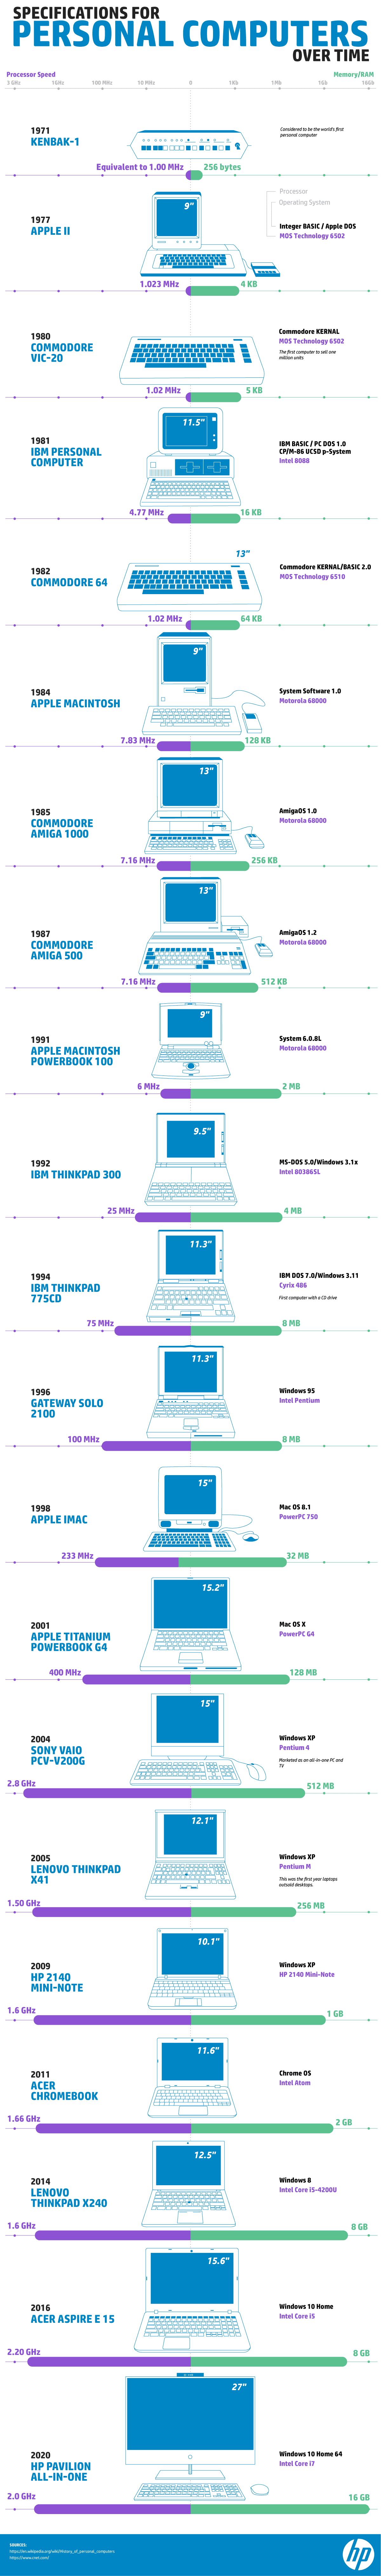 How Powerful Were Computers Over Time